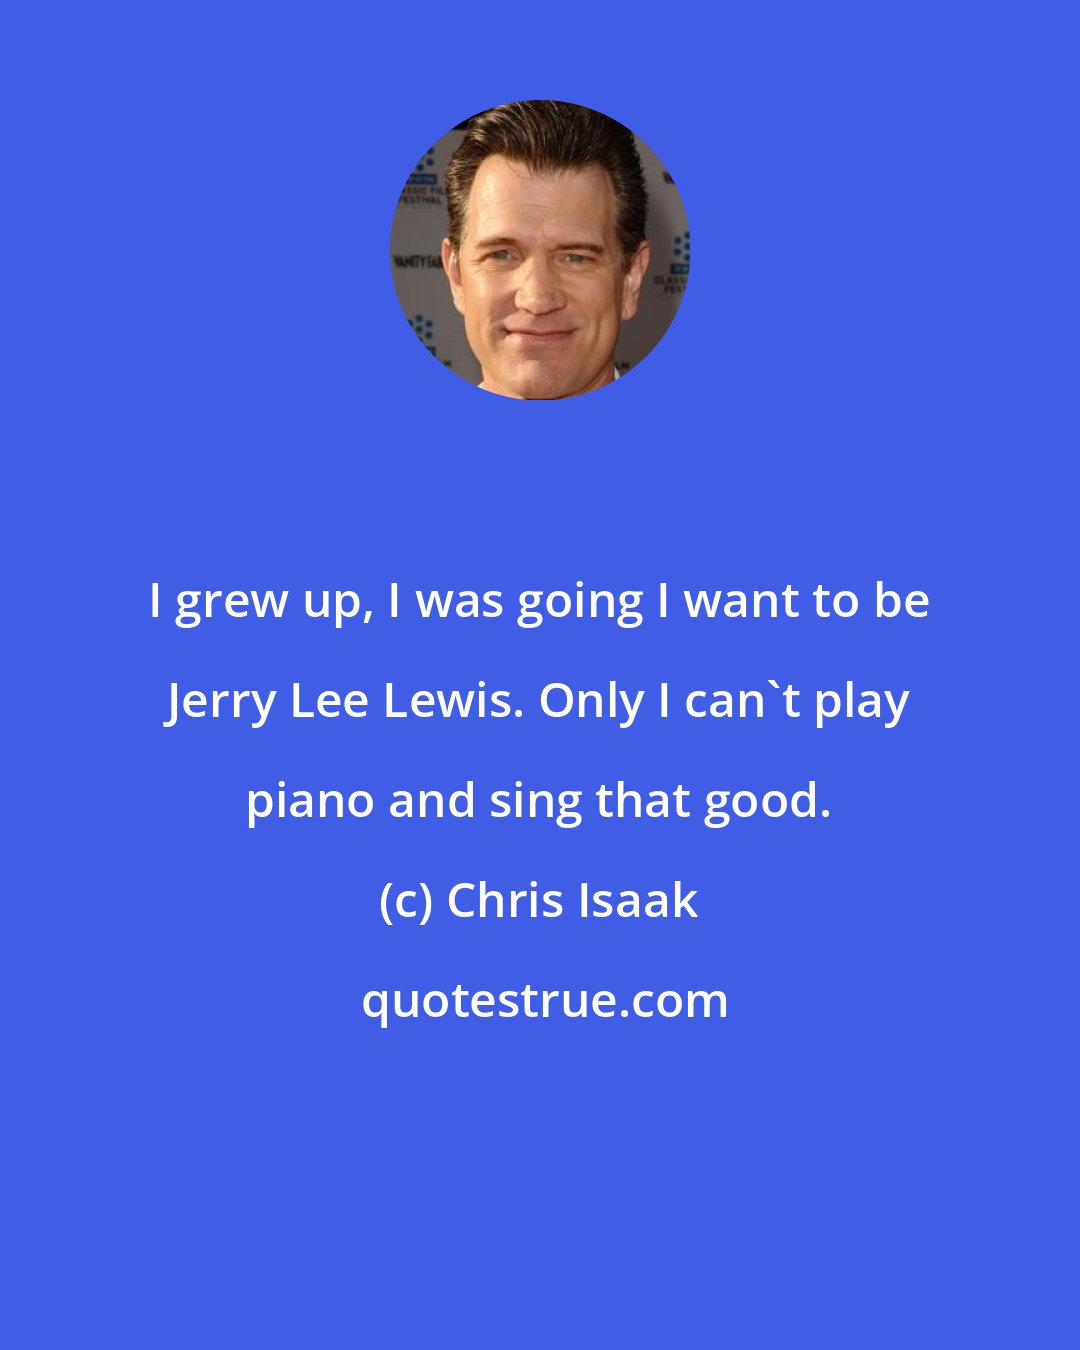 Chris Isaak: I grew up, I was going I want to be Jerry Lee Lewis. Only I can't play piano and sing that good.